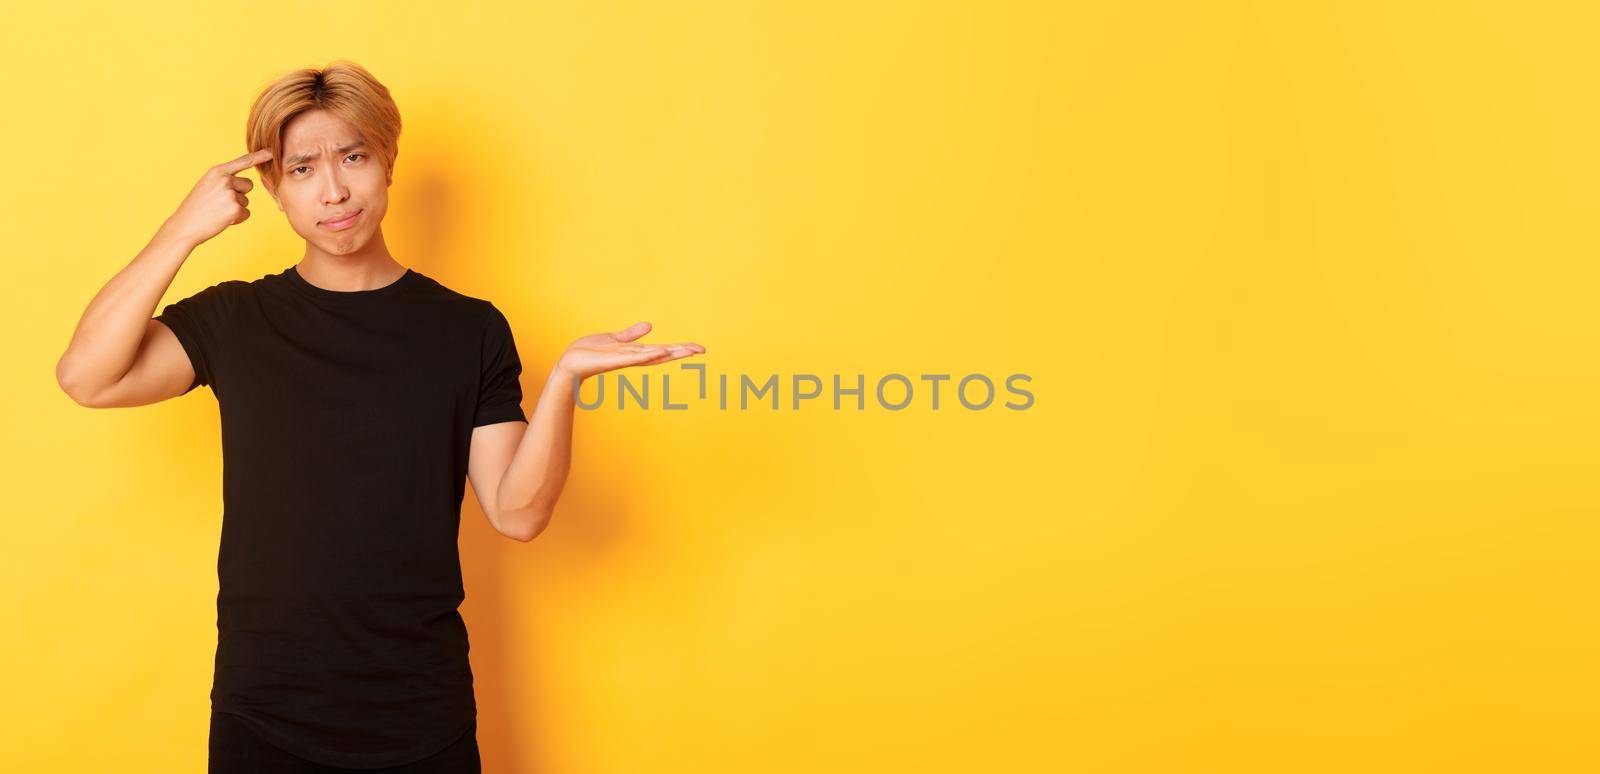 Disappointed asian guy with blond hair, raising hand up puzzled and scolding someone acting stupid, standing yellow background.